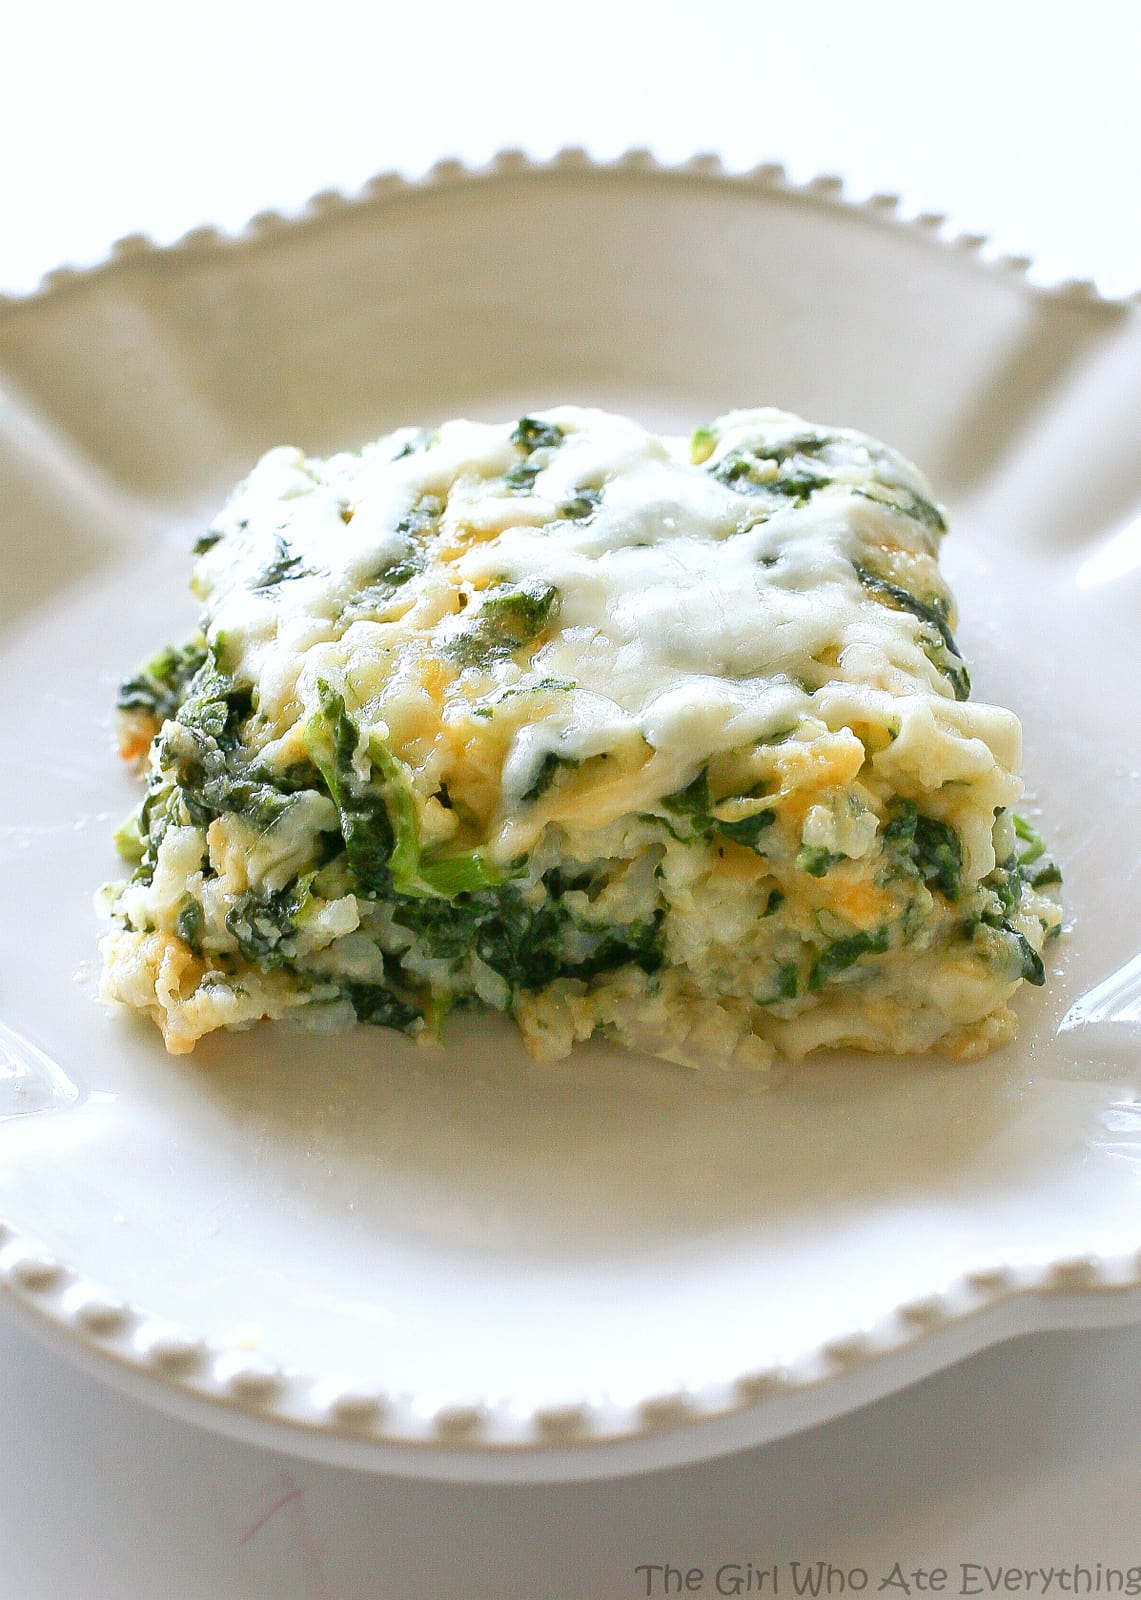 Spinach Parmesan Rice Bake - a cheesy side dish with spinach, cheese, and rice. the-girl-who-ate-everything.com